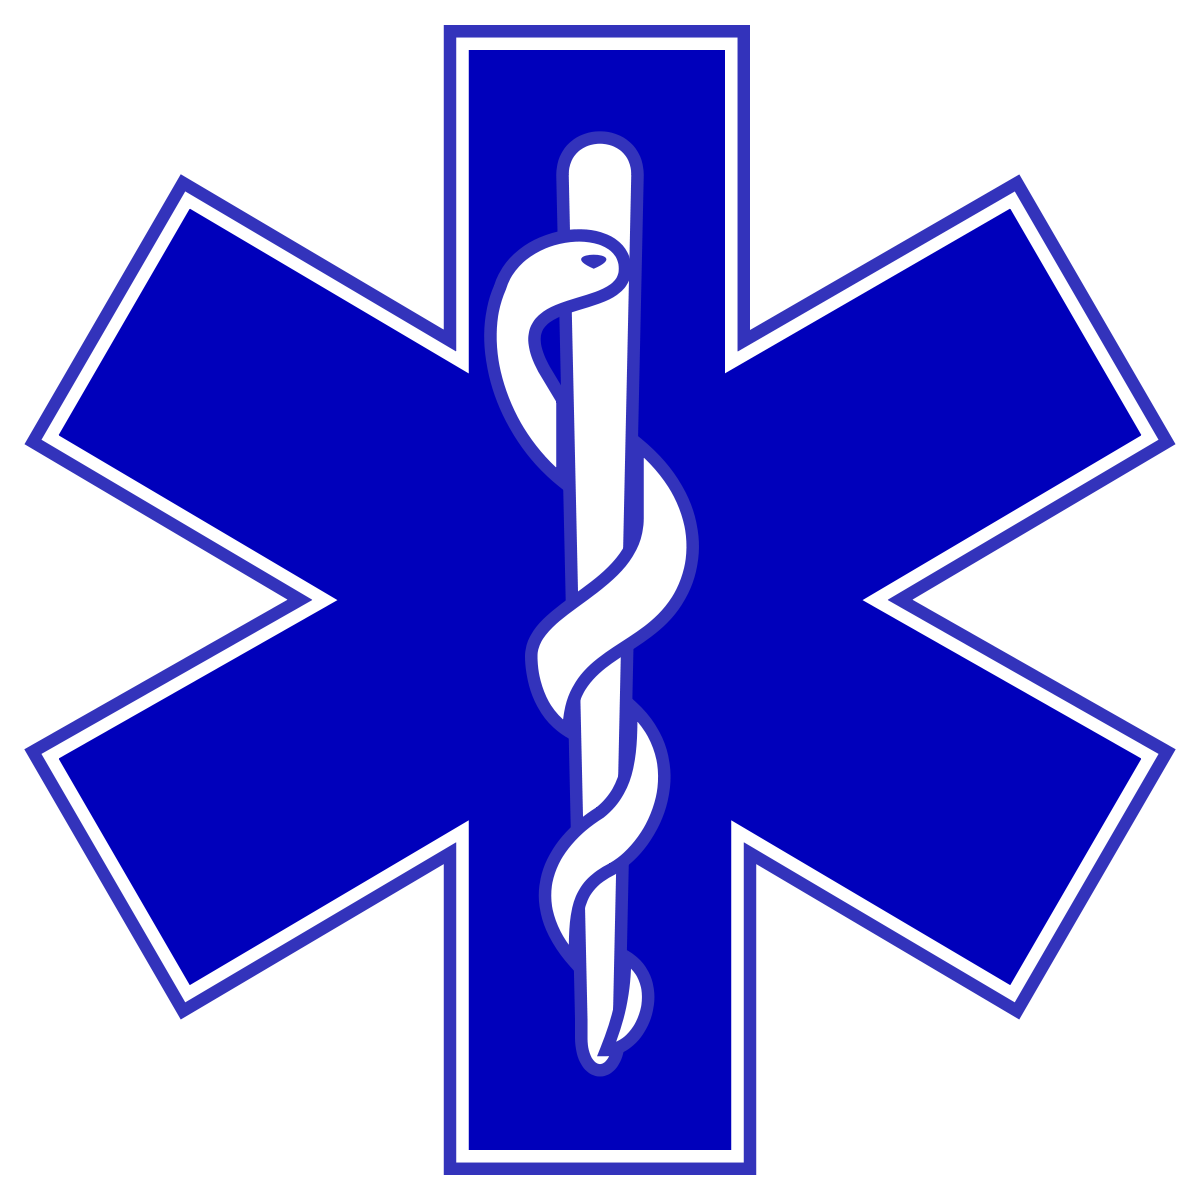 Ems star of life. Medicine clipart medical condition